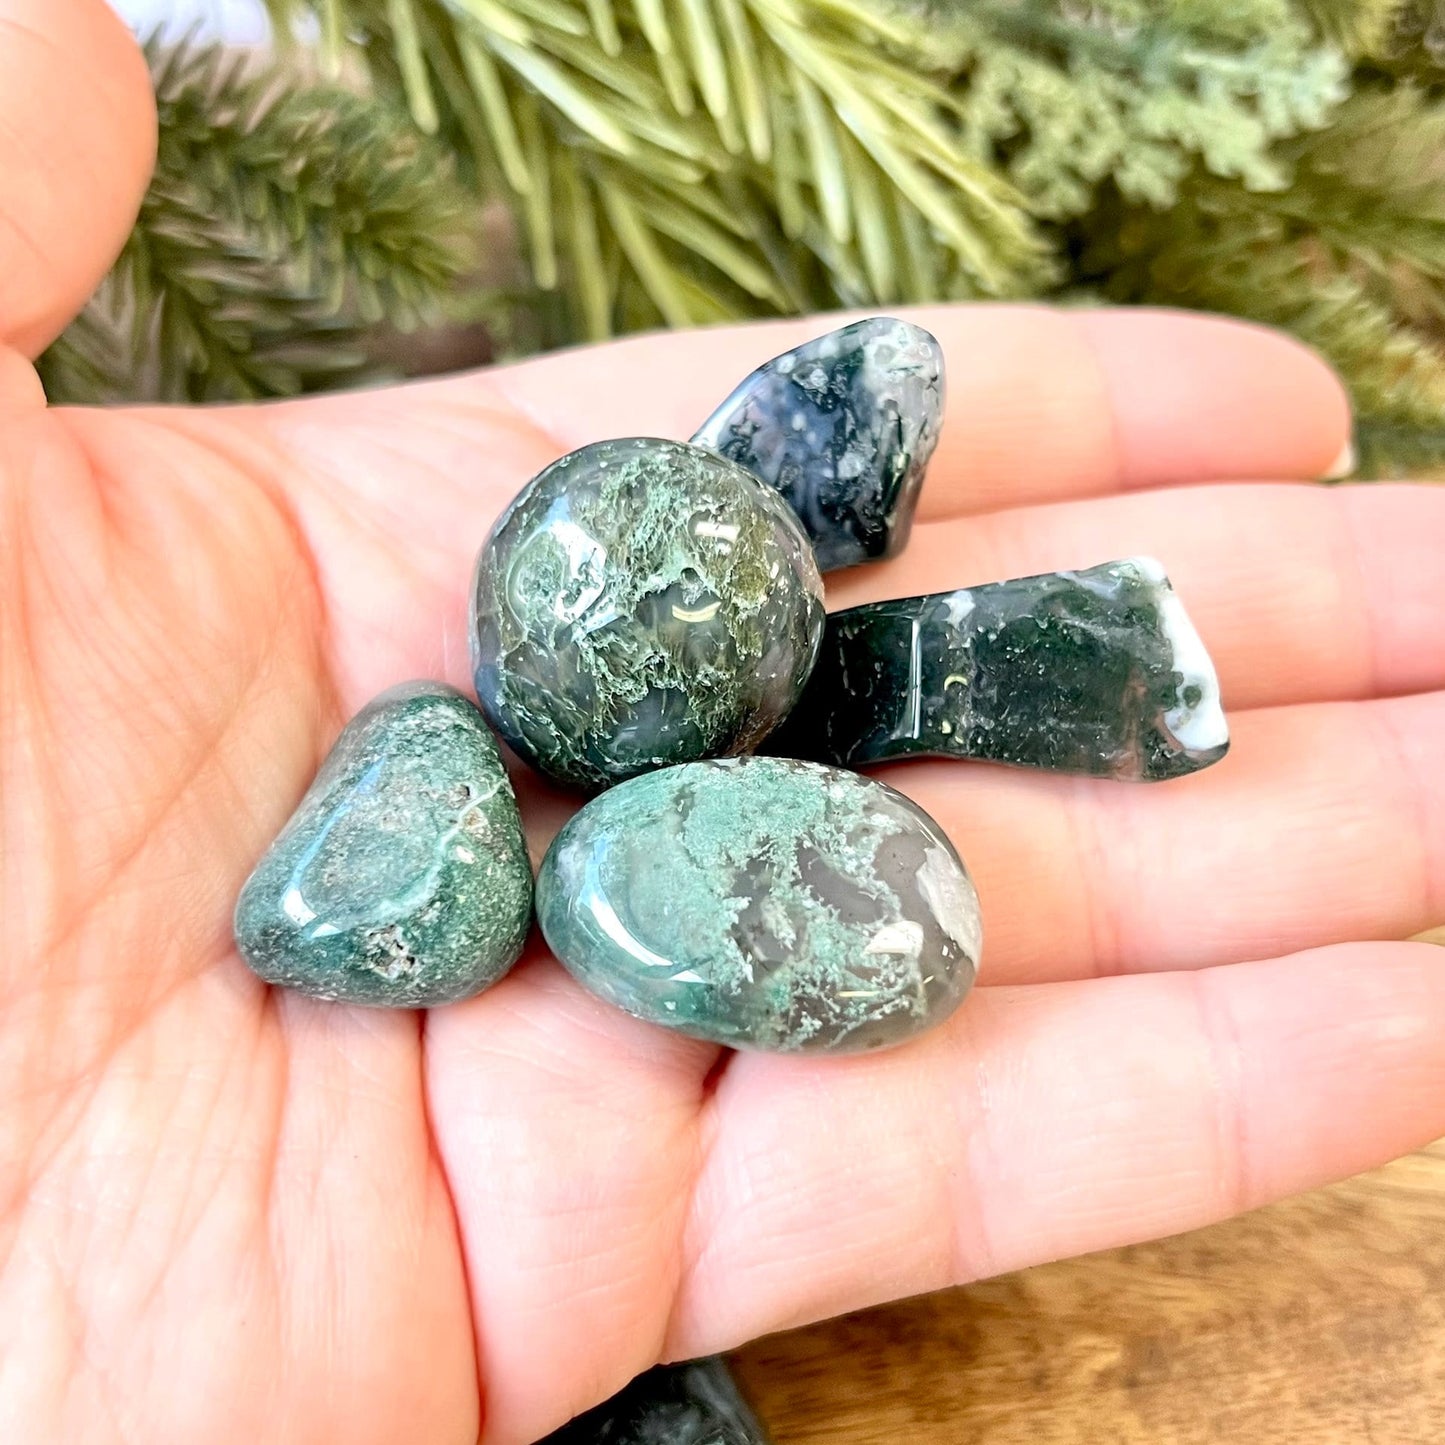 Moss Agate Tumbled Crystal - You get one